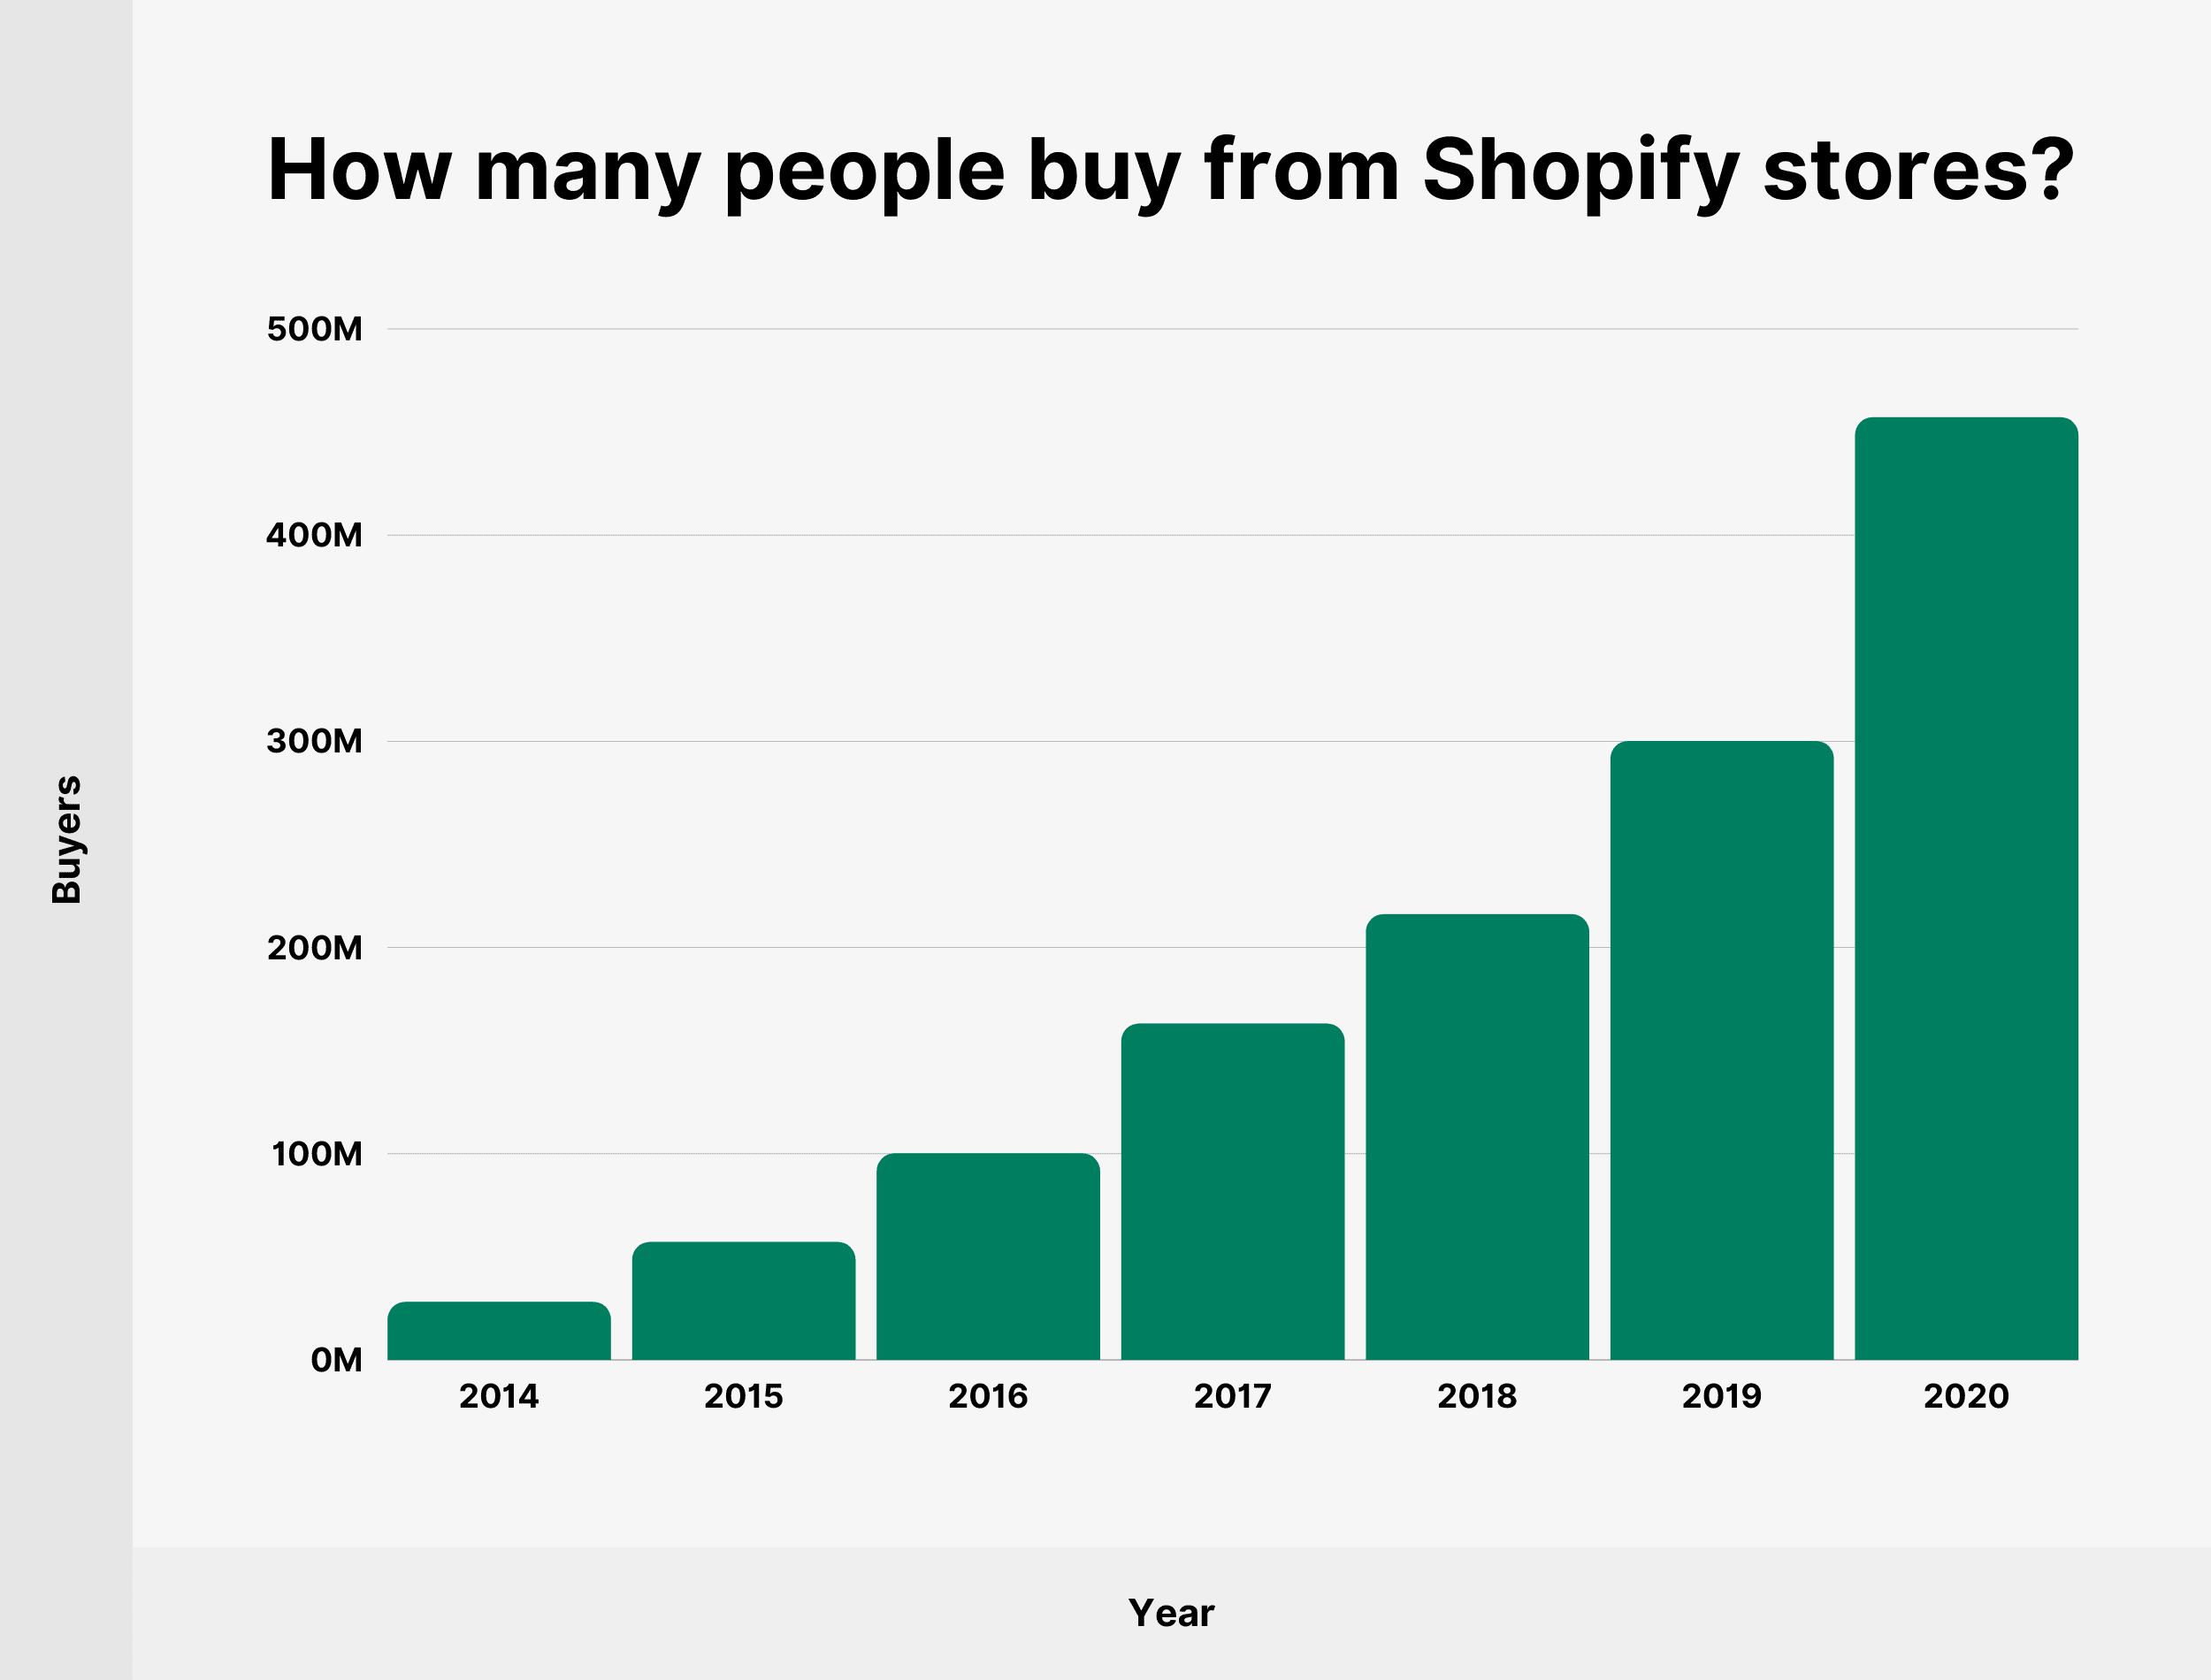 How many people buy from Shopify stores?